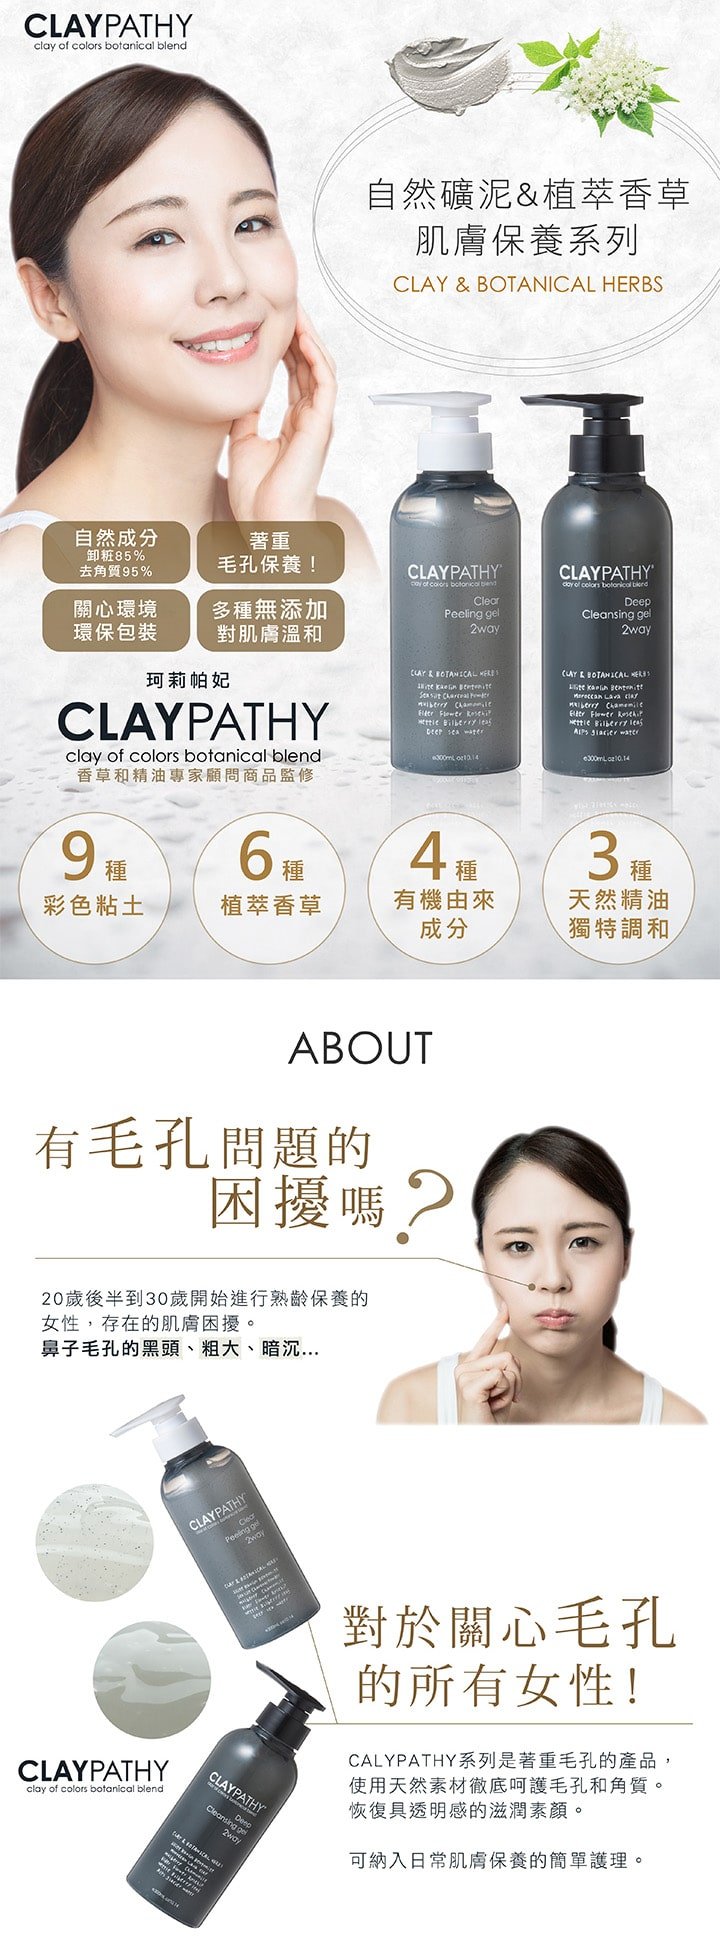 Claypathy Cleansing Travel Pack - Intro